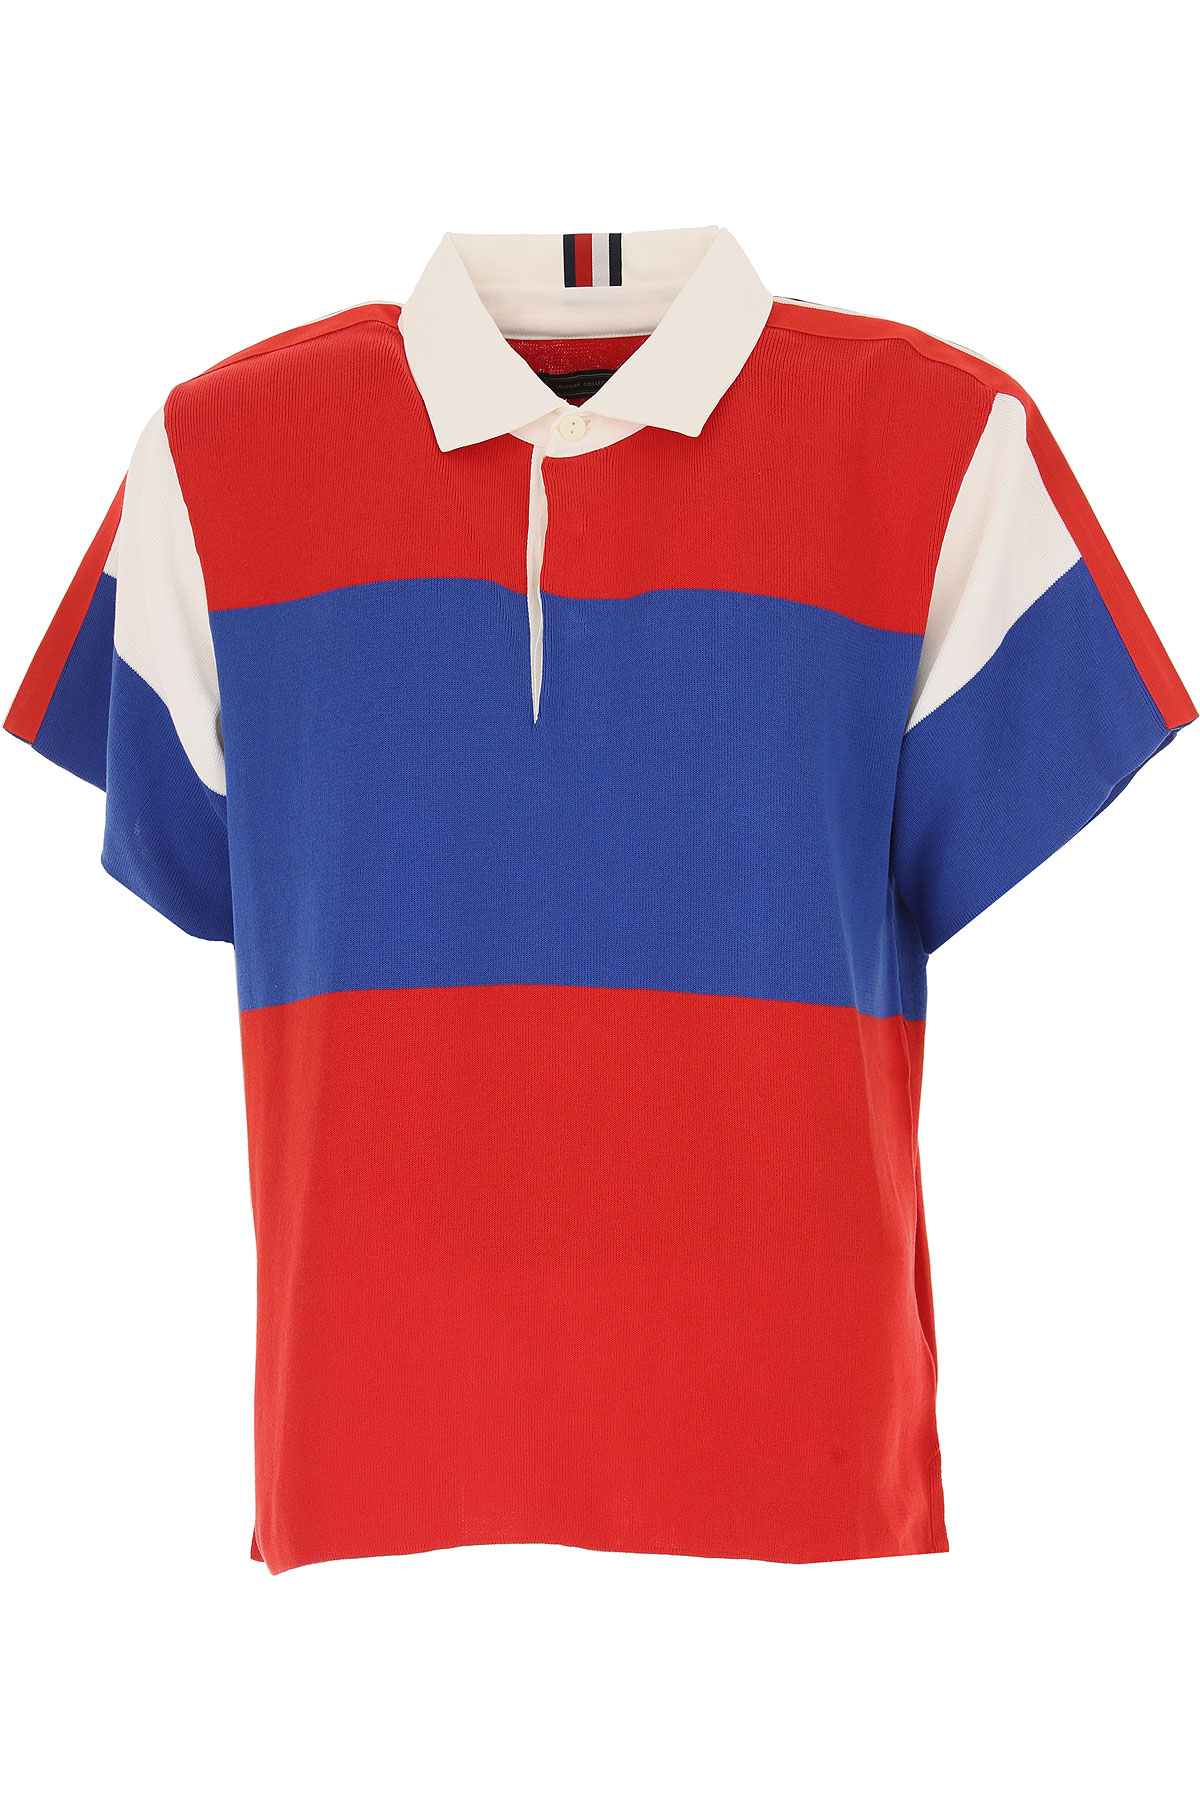 Tommy Hilfiger Polo Homme, Rouge, Coton, 2017, M S